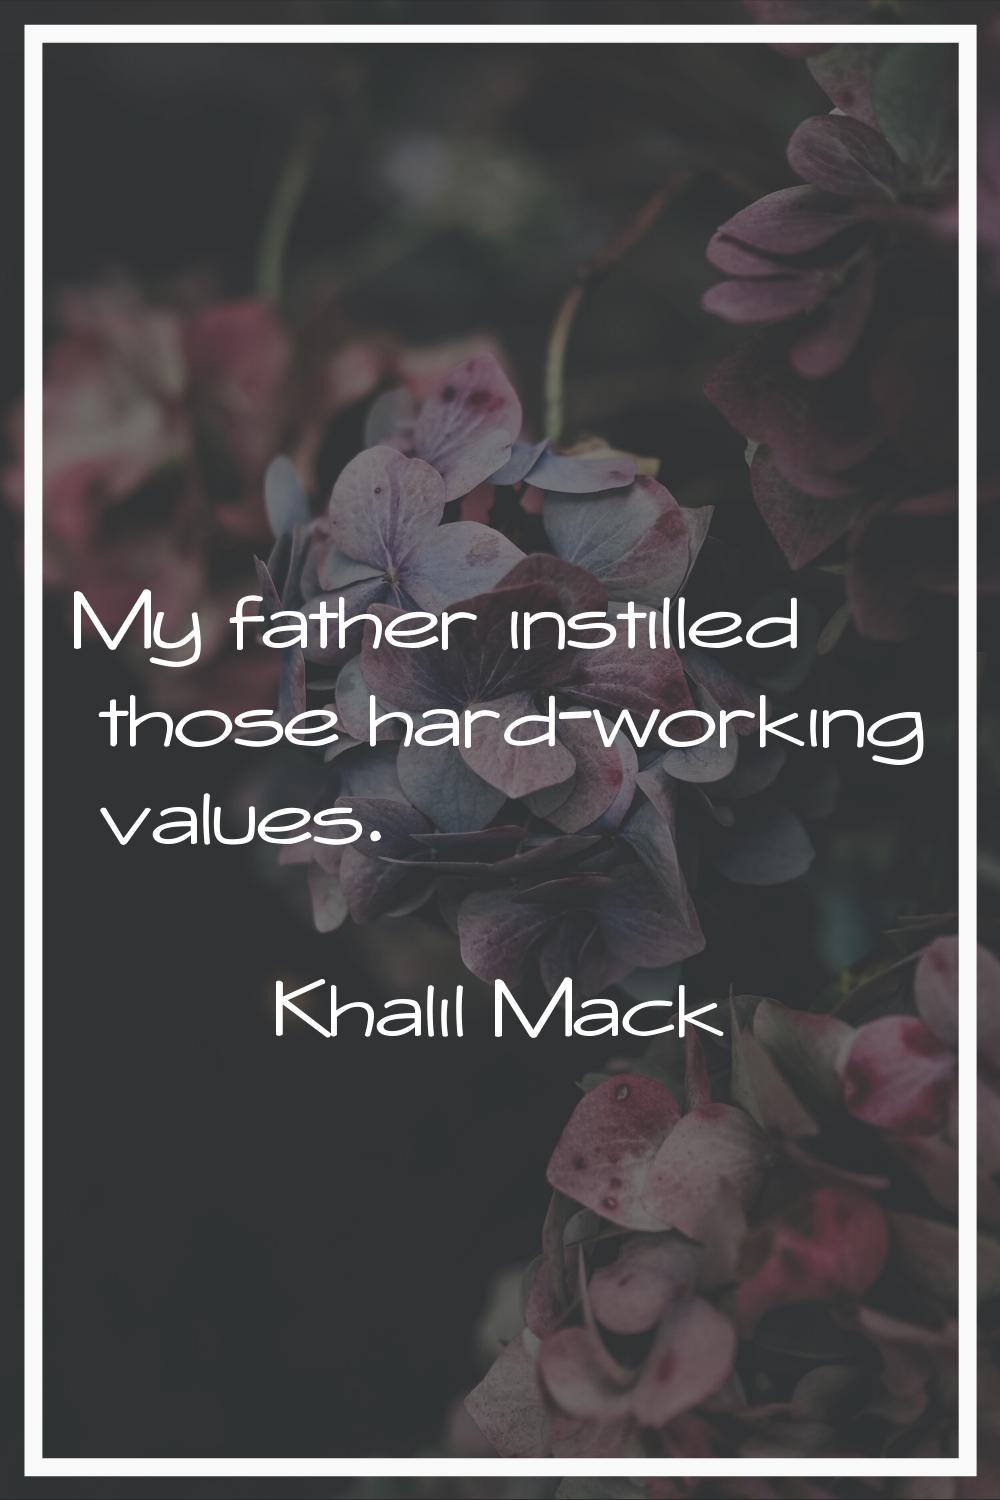 My father instilled those hard-working values.